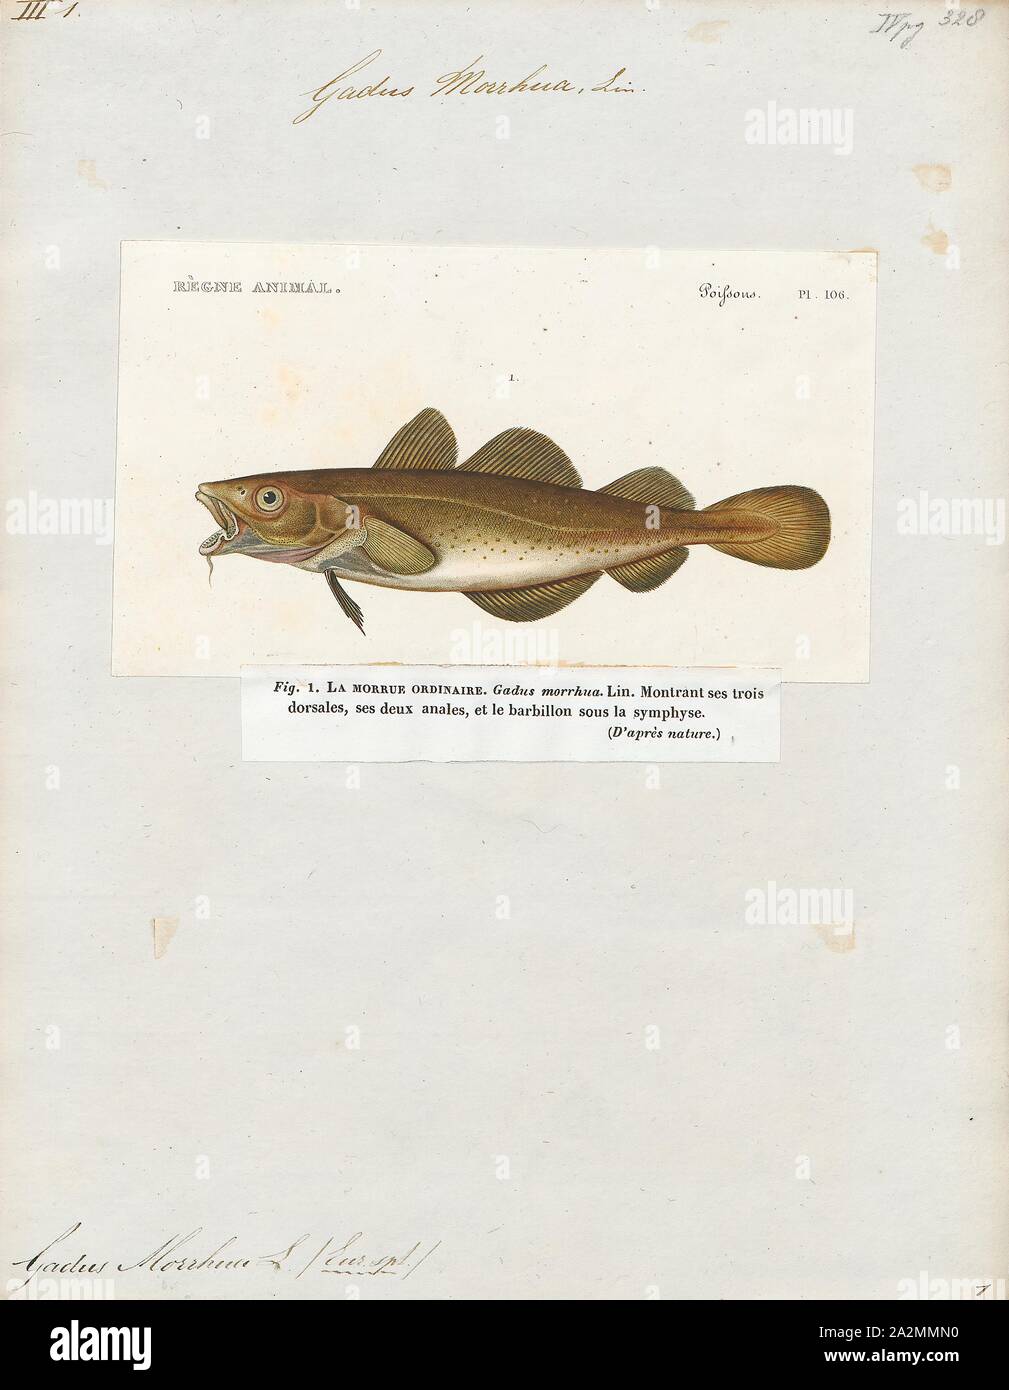 Gadus morrhua, Print, Gadus is a genus of demersal fish in the family Gadidae, commonly known as cod, although there are additional cod species in other genera. The best known member of the genus is the Atlantic cod., 1817-1841 Stock Photo